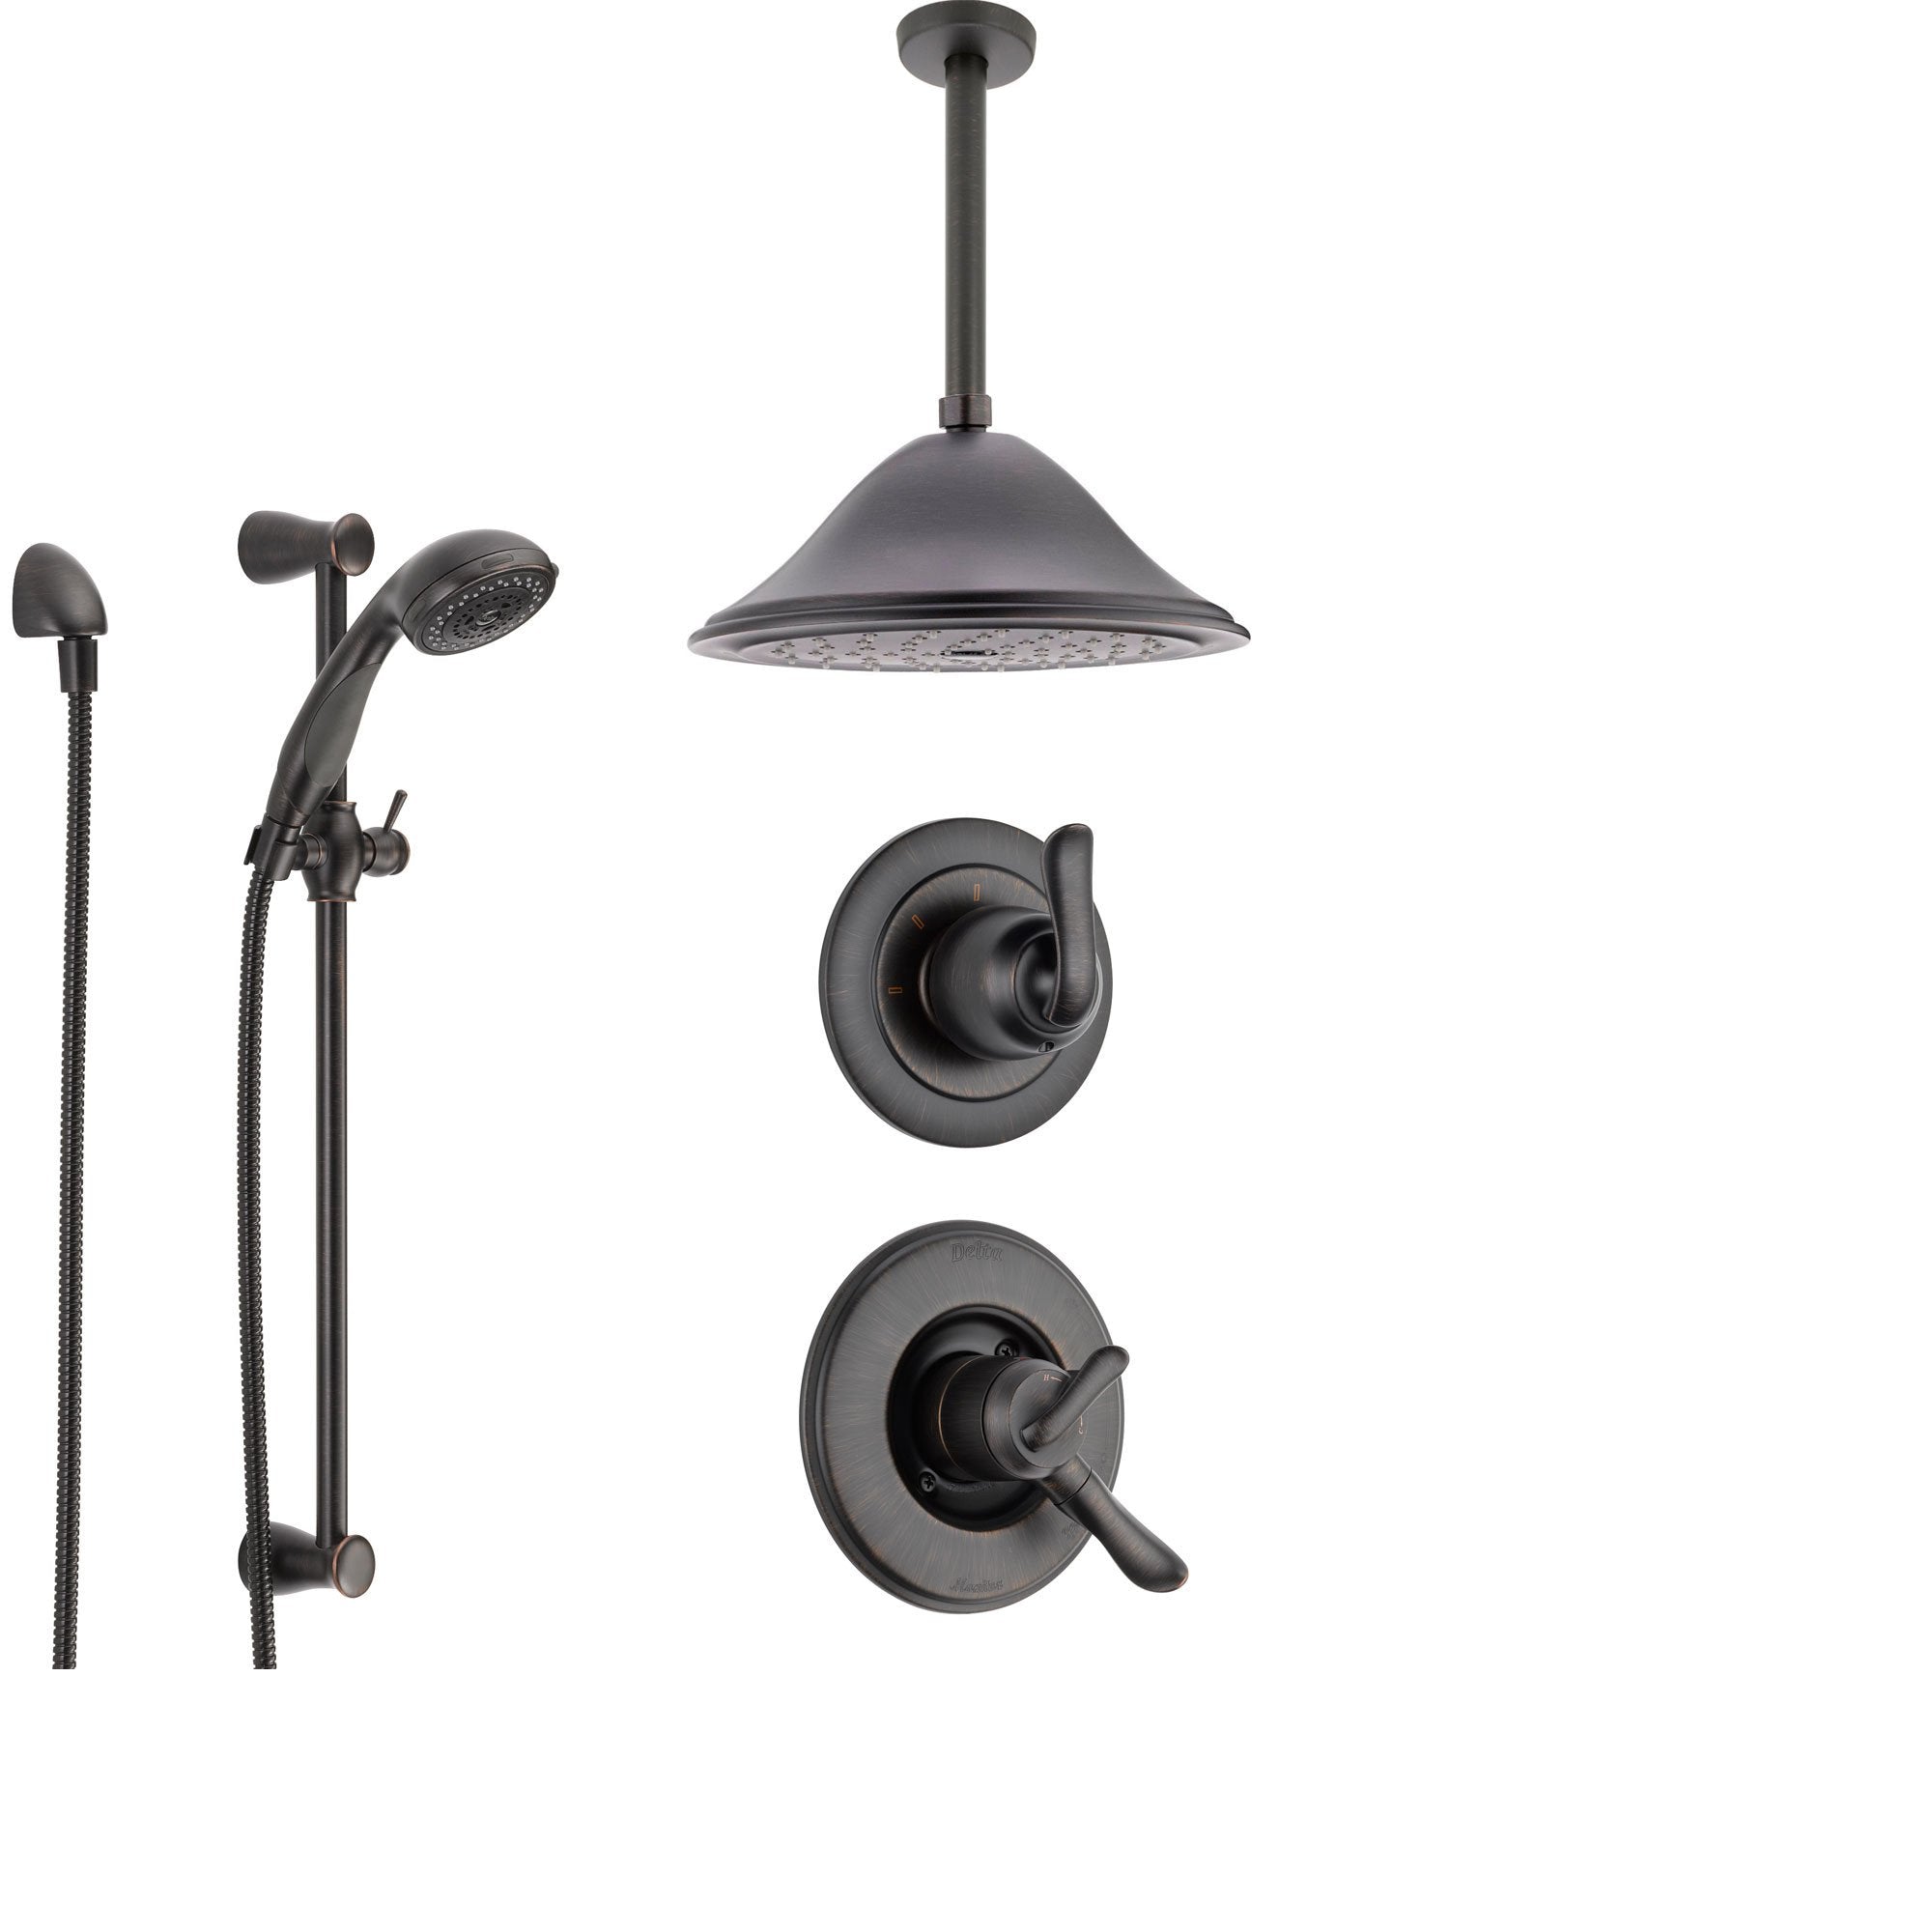 Delta Linden Venetian Bronze Shower System with Dual Control Shower Handle, 3-setting Diverter, Large Ceiling Mount Rain Showerhead, and Handheld Shower SS179482RB